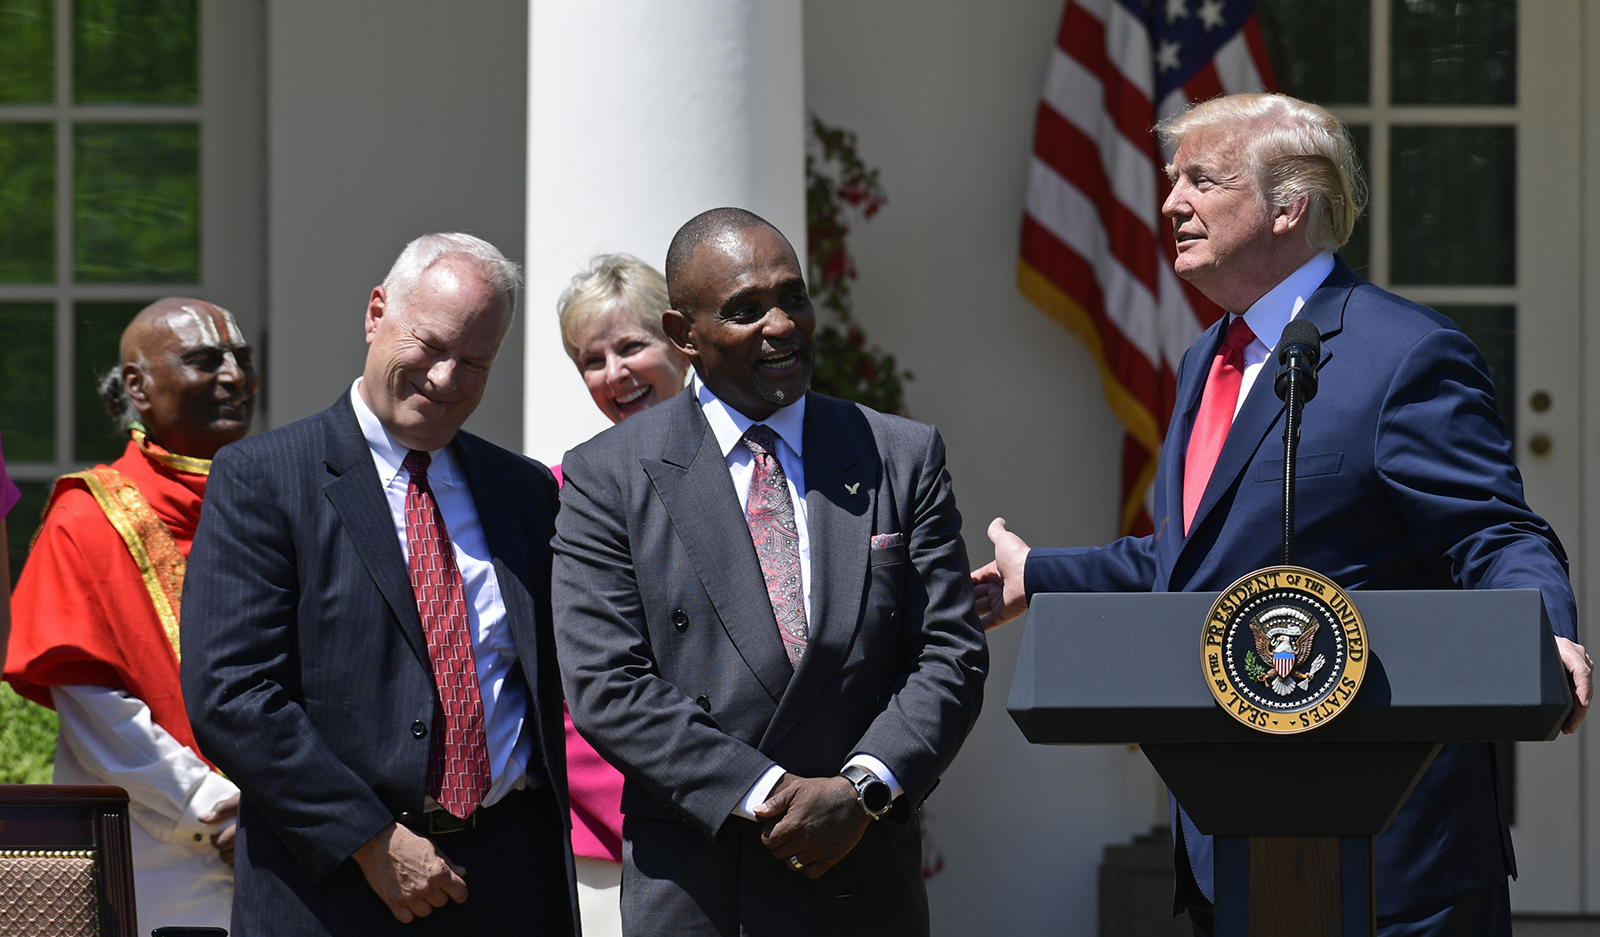 In this May 3, 2018 file photo, President Donald Trump talks about Jon Ponder, center, from Las Vegas during a National Day of Prayer event in the Rose Garden of the White House in Washington.